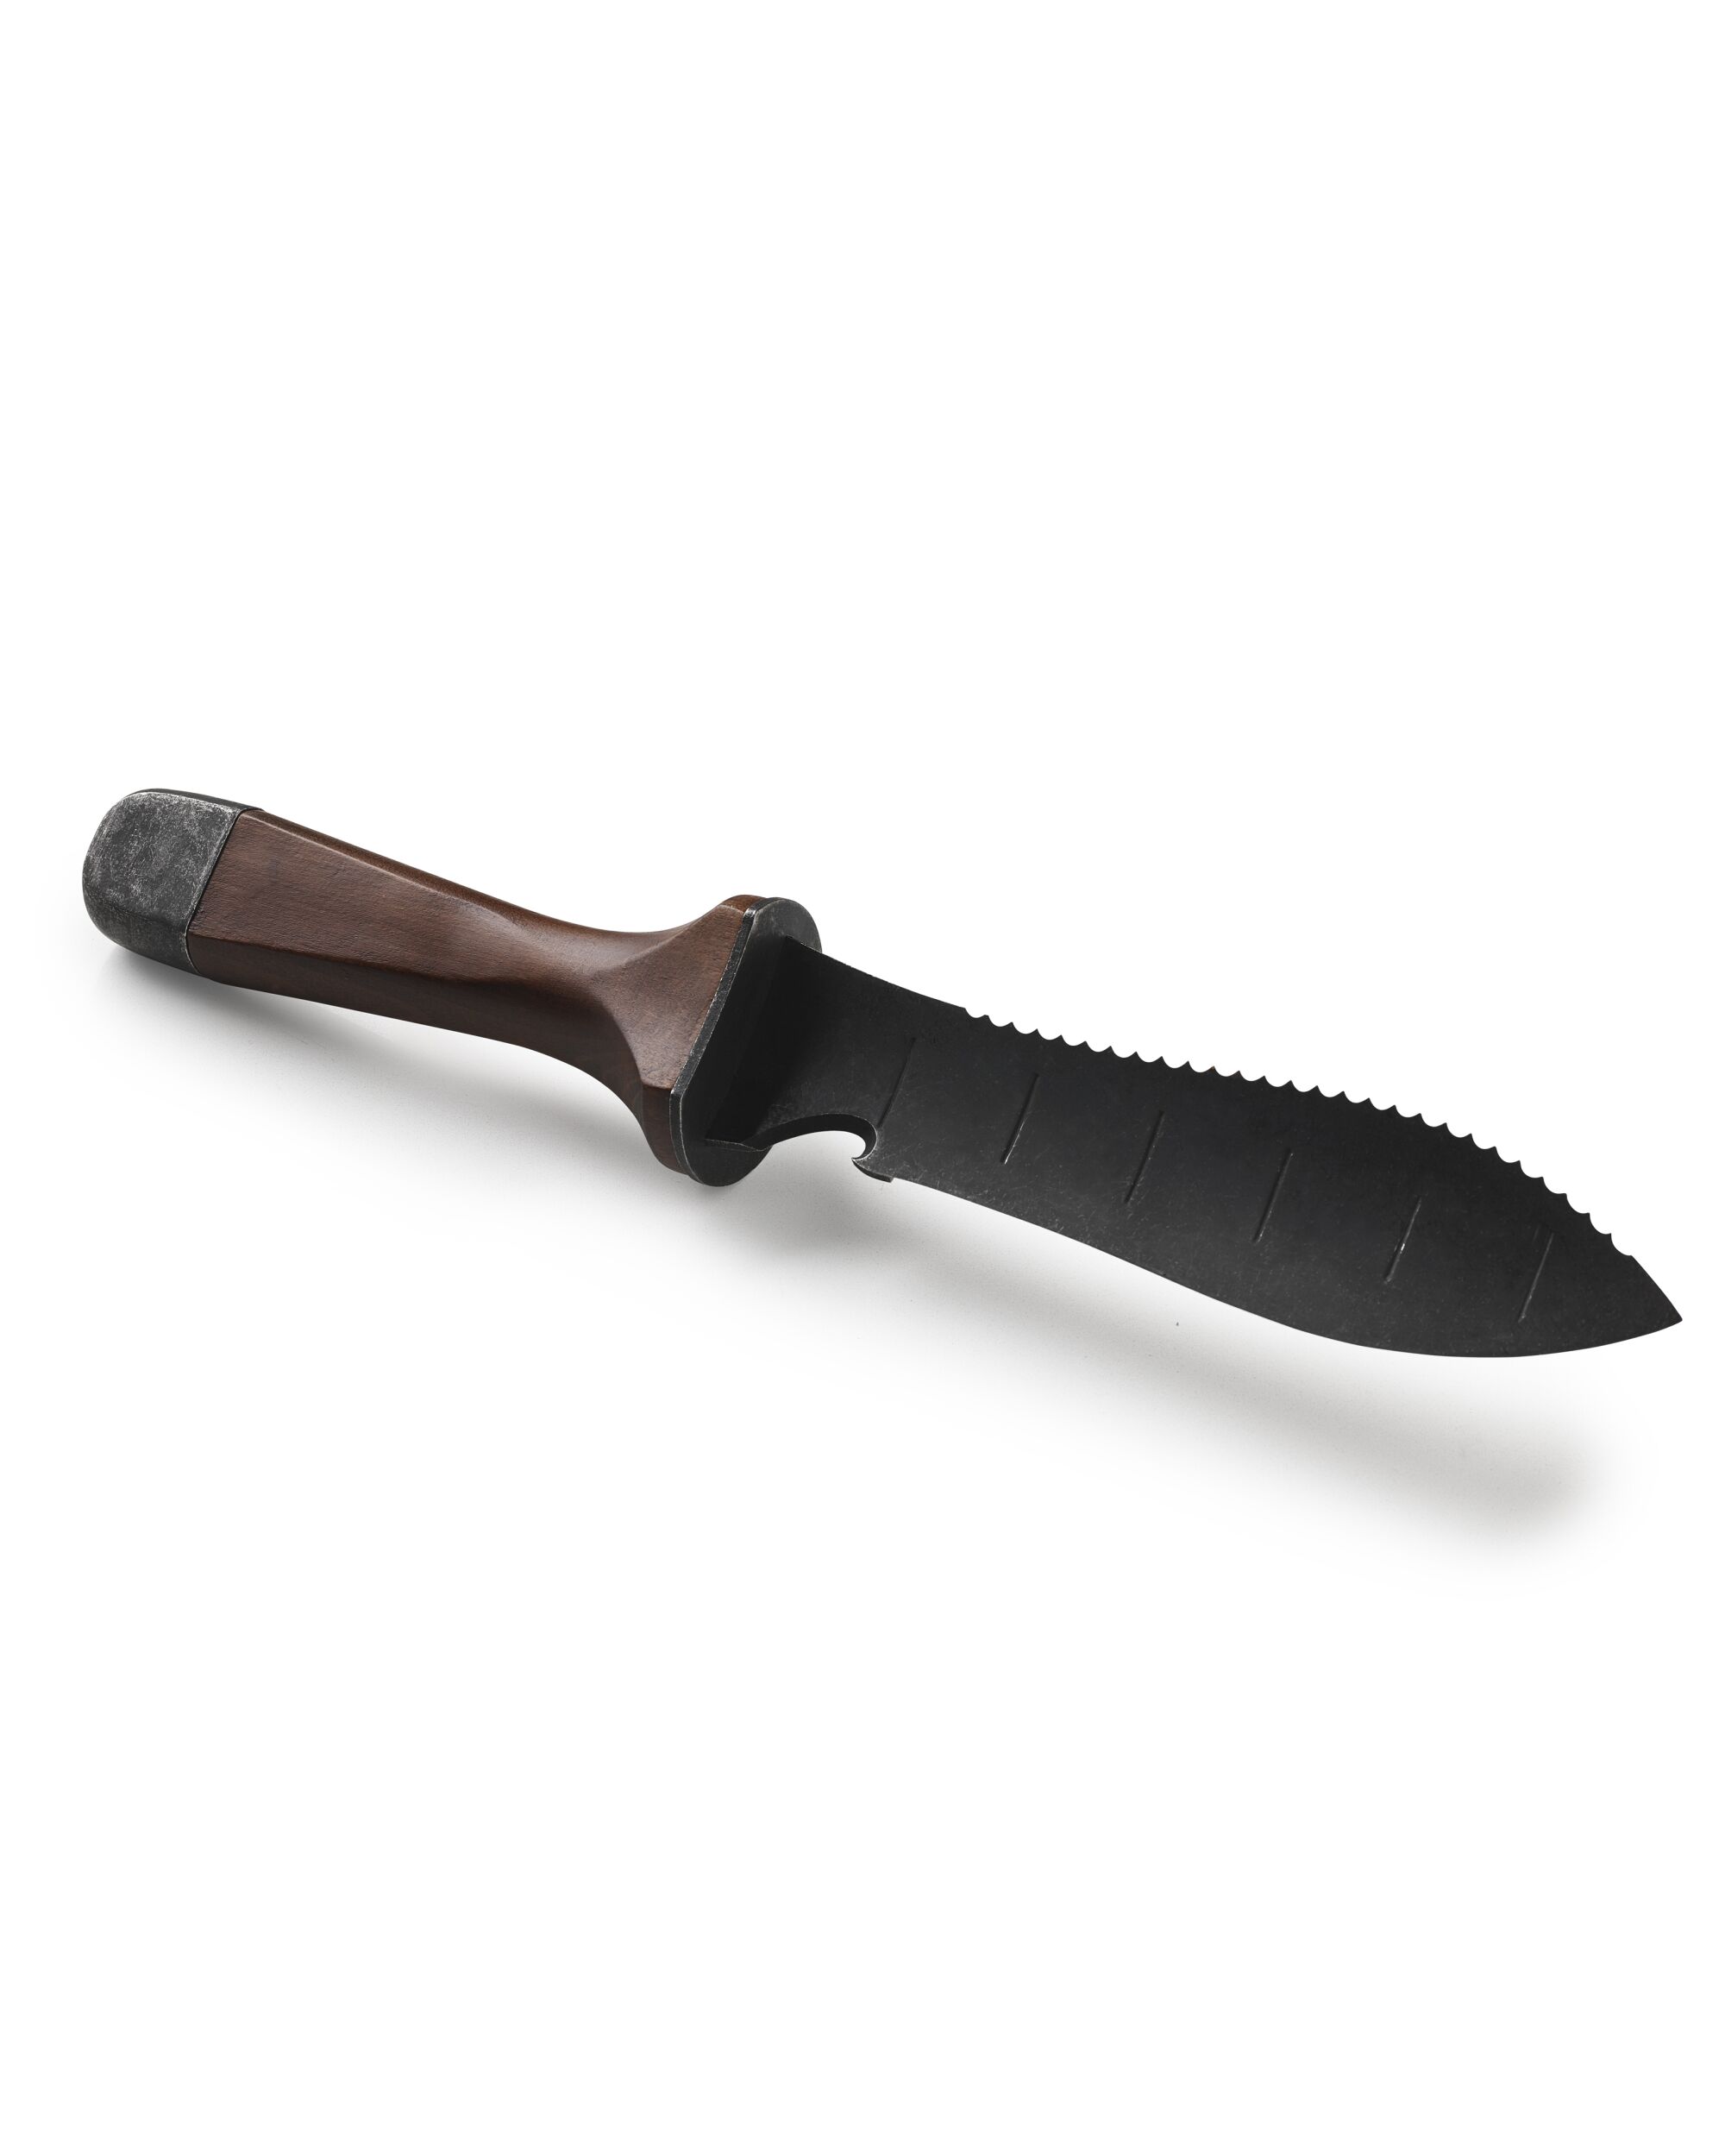 Hori Hori Knife (for foraging, camping) by Barebones